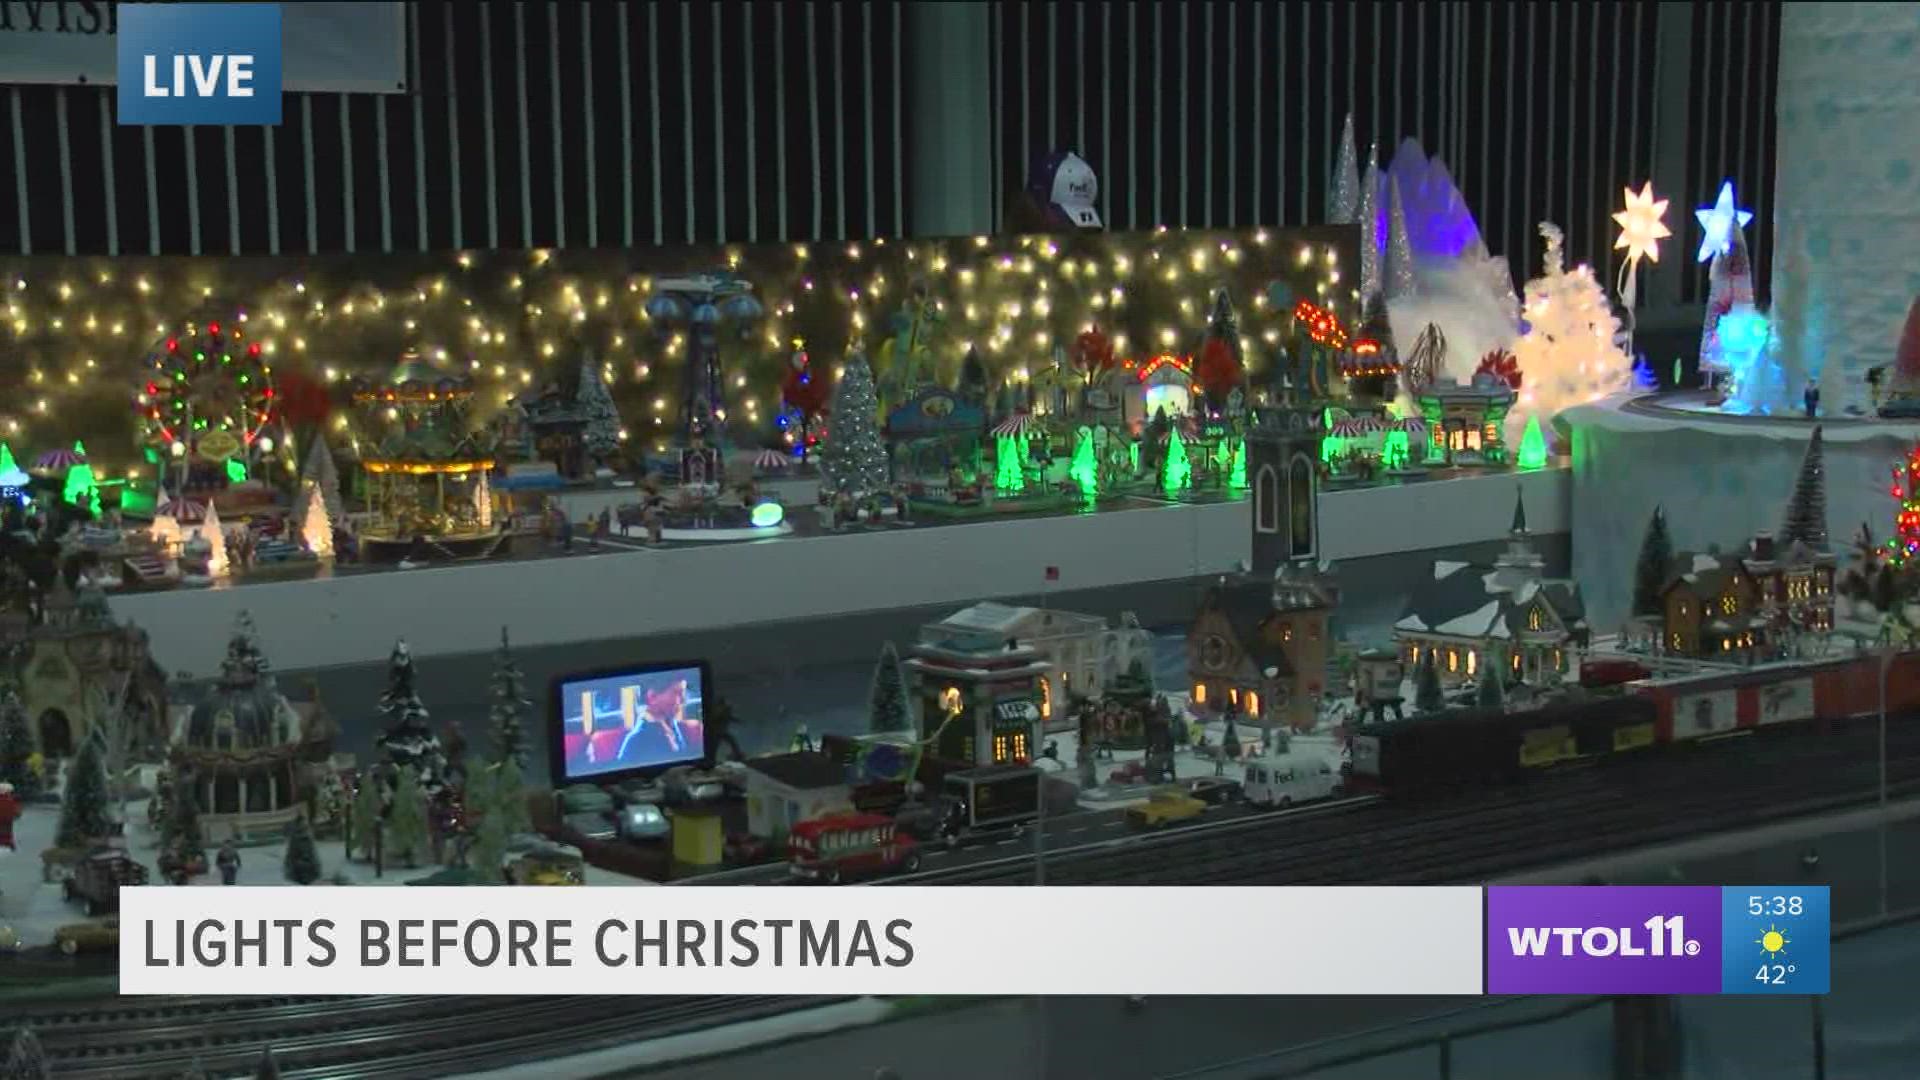 Shayla Bell Moriarty, Chief of Staff/Senior VP for the Toledo Zoo, explains how Lights Before Christmas is put together and what new technology is in place this year